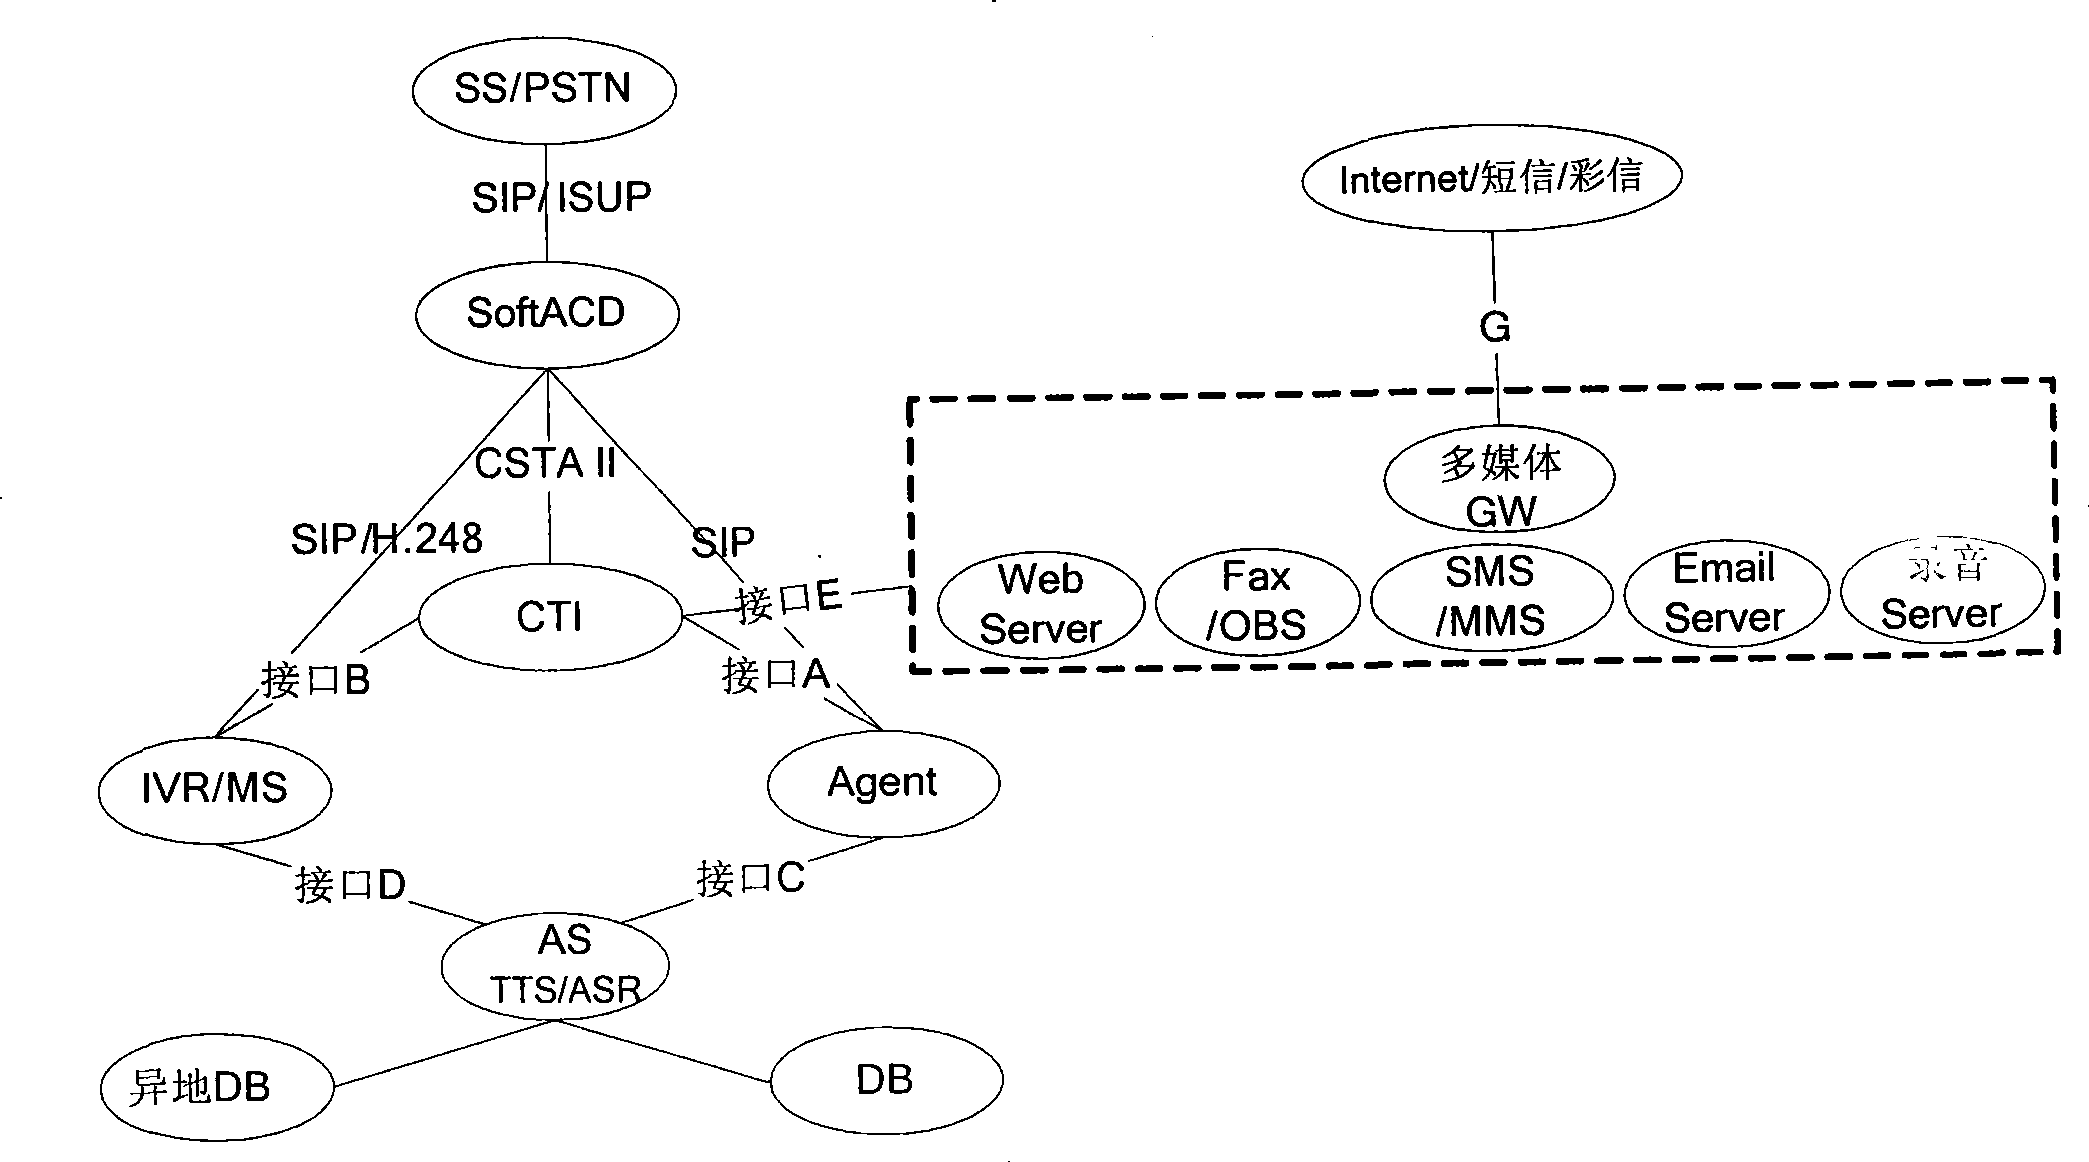 Multi-language voice recognition method and system based on soft queuing call center